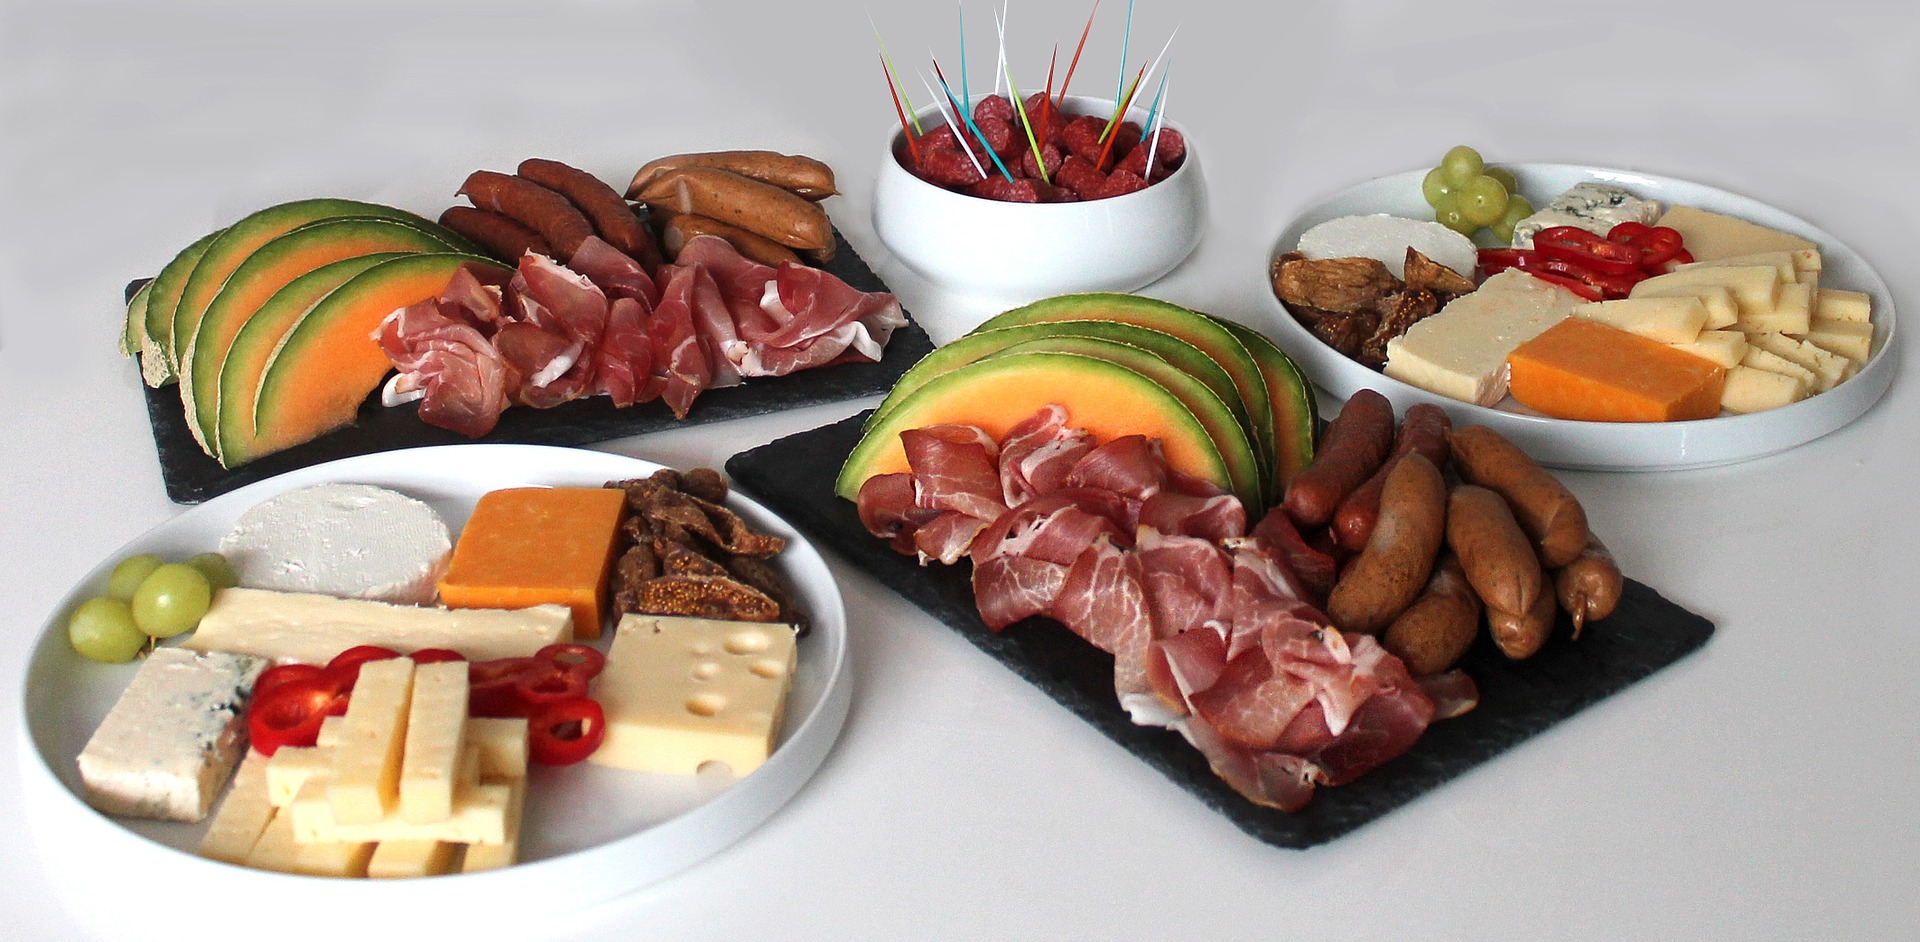 Planning a Trip to Spain: Eating Tapas